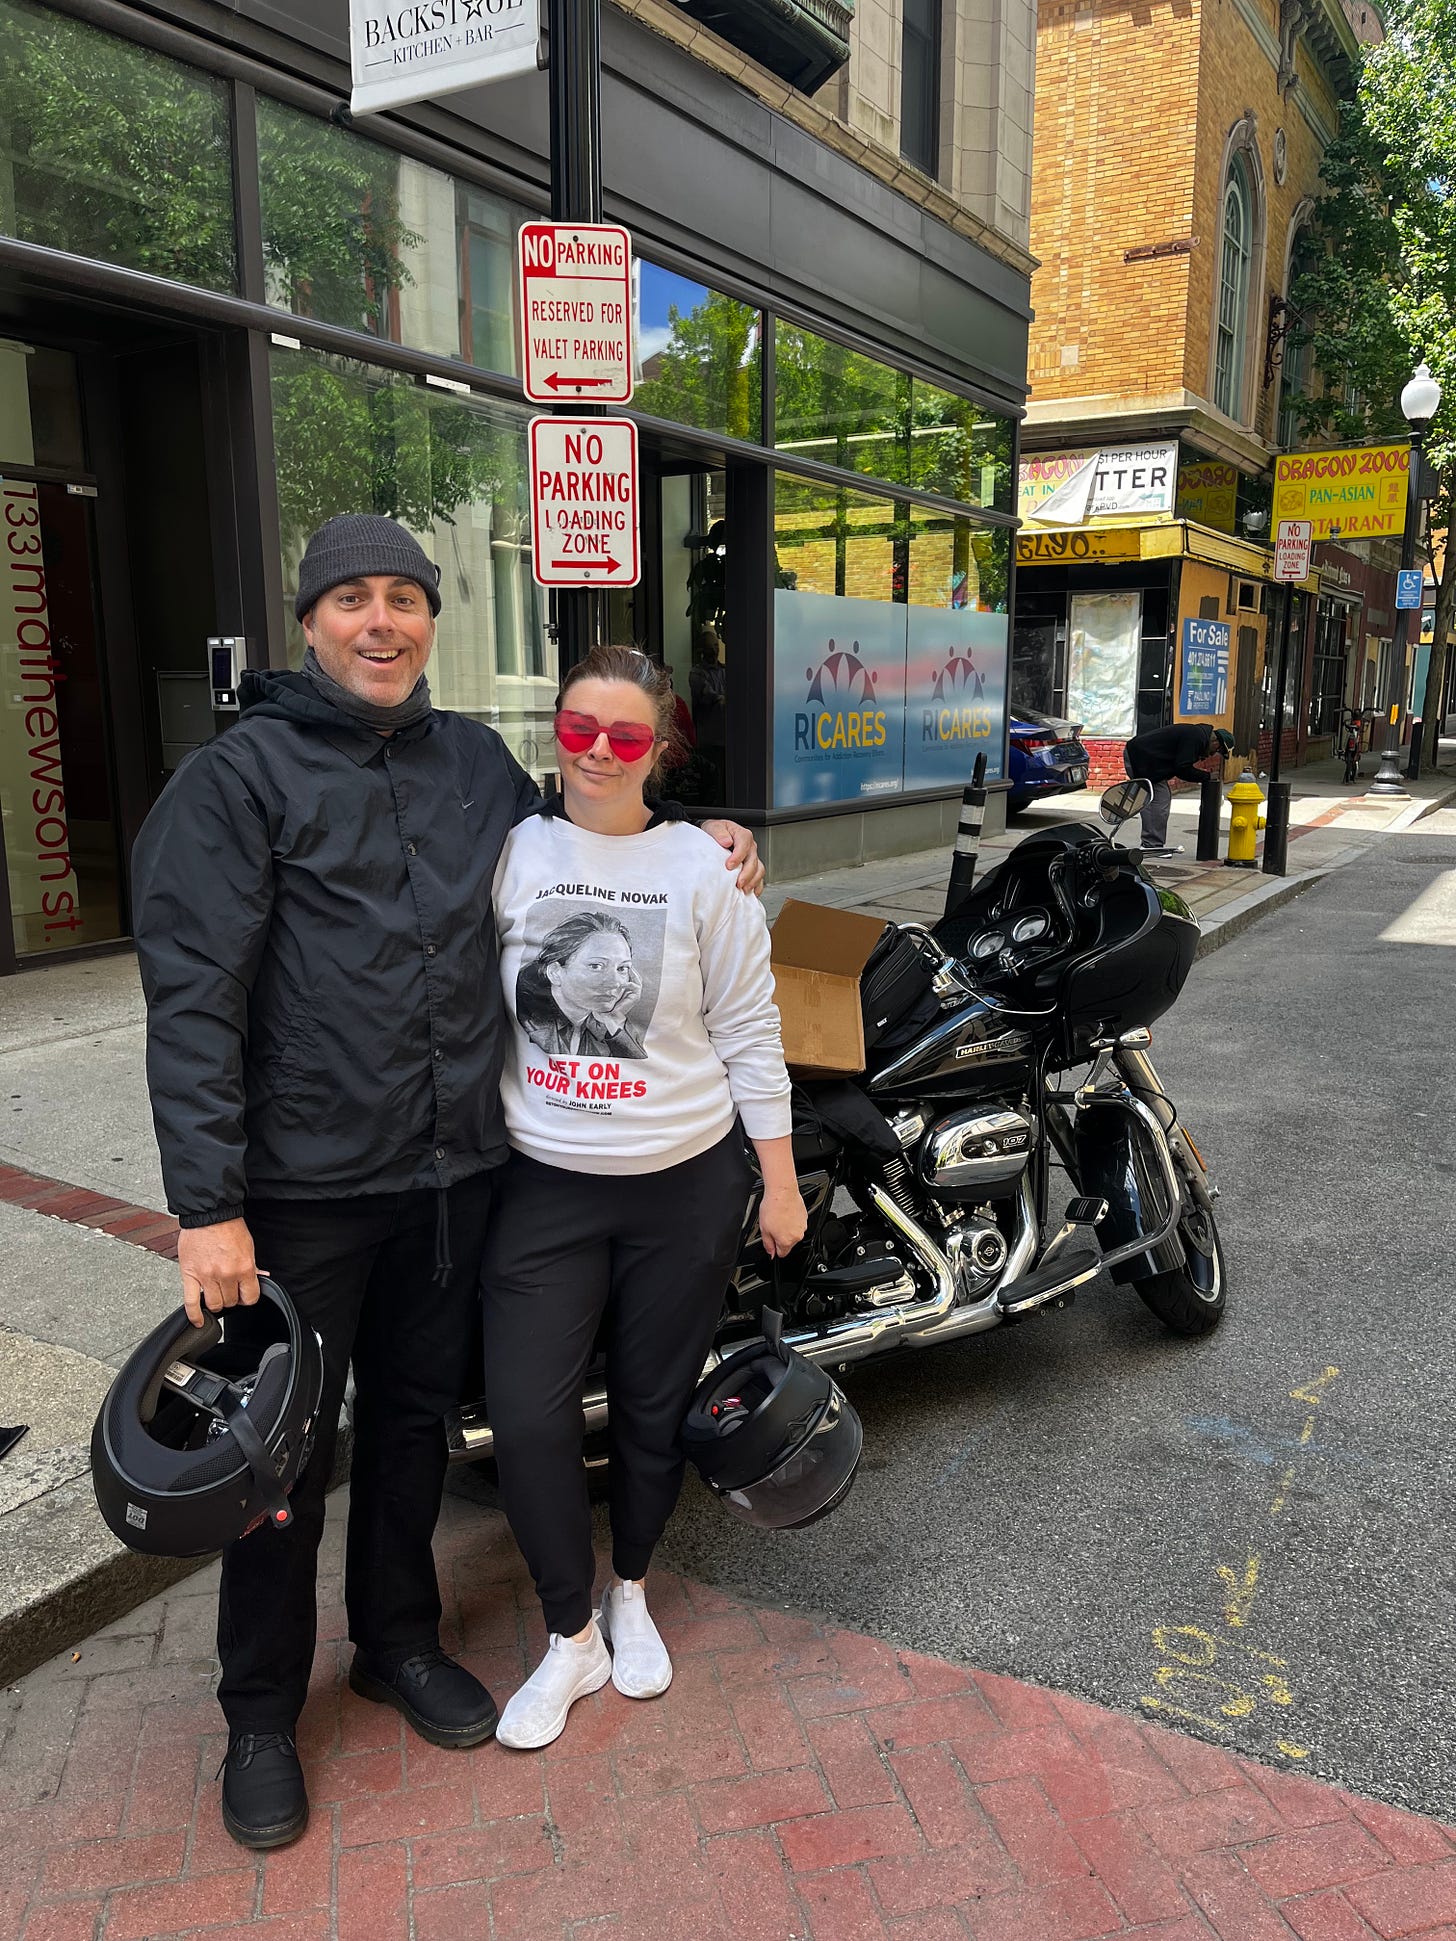 Derrick and Amber pose with their arms around each other in front of their parked motorcycle. Amber wears red heart-shaped glasses and smiles slightly. Derrick holds his bike helmet and is smiling, looking excited.